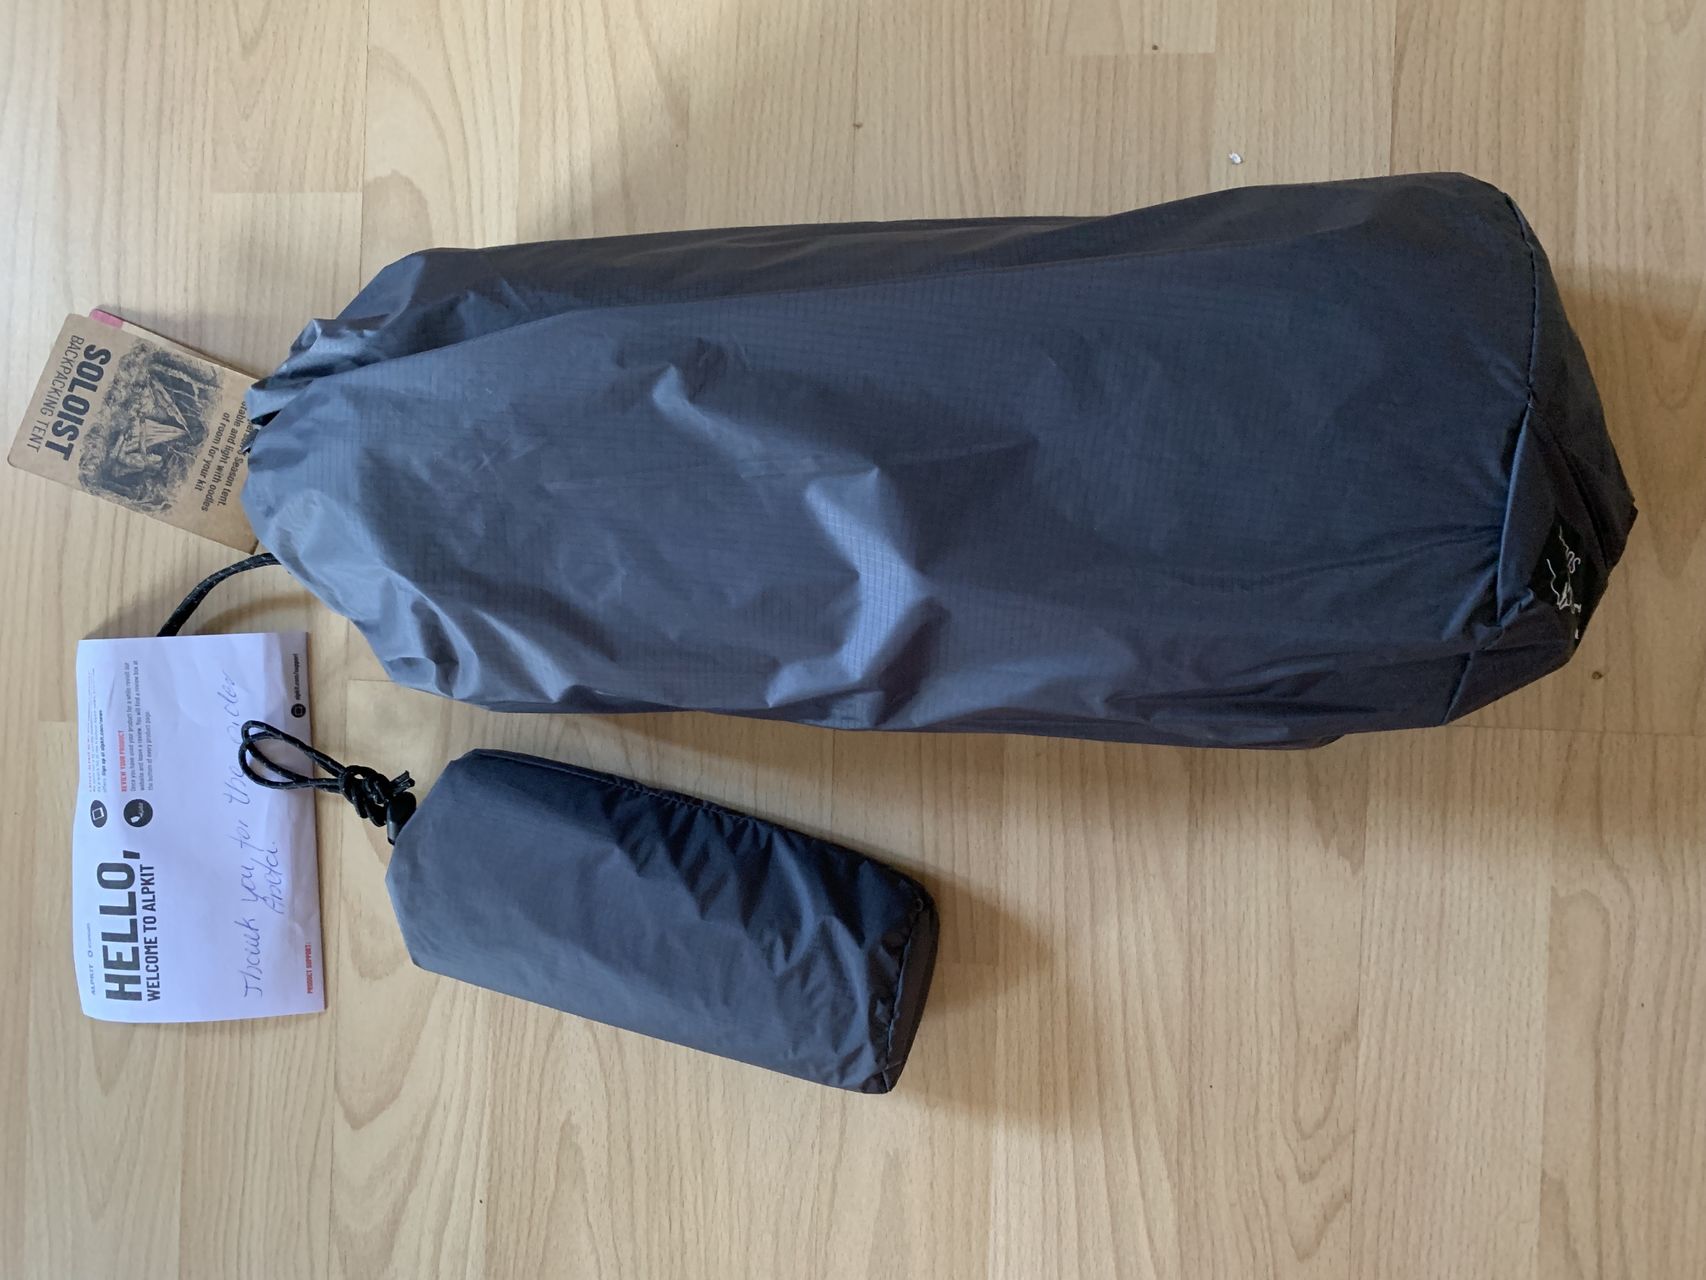 DISCO3.CO.UK - View topic - [Sold] Selection of as new/vgc Alpkit tent ...